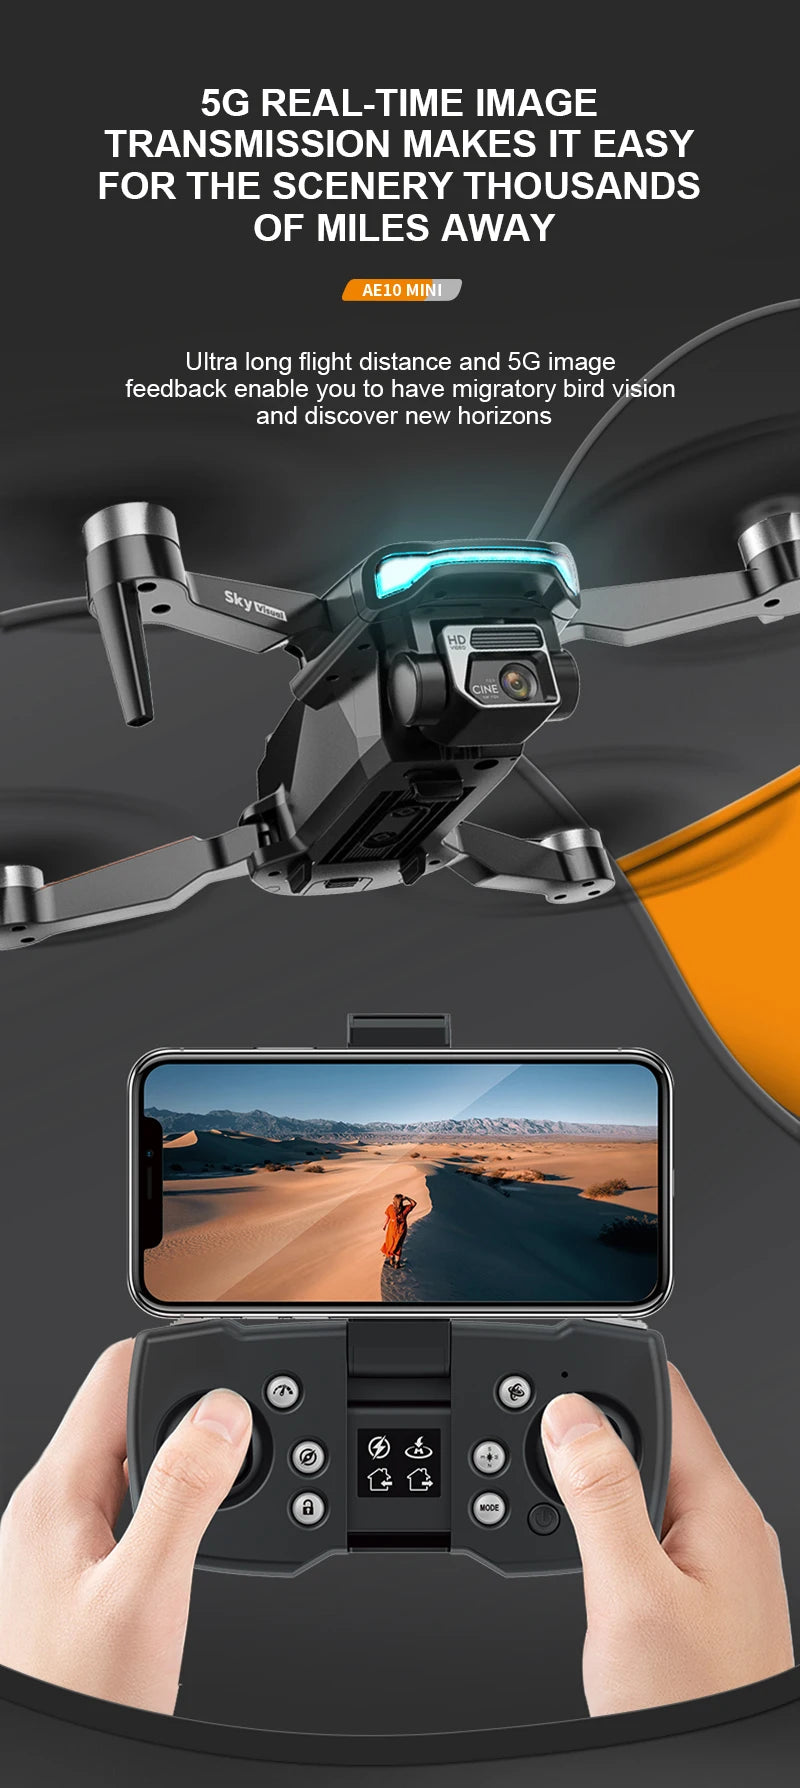 AE10 Drone, 5g real-time image transmission makes it easy for the scenery thousands